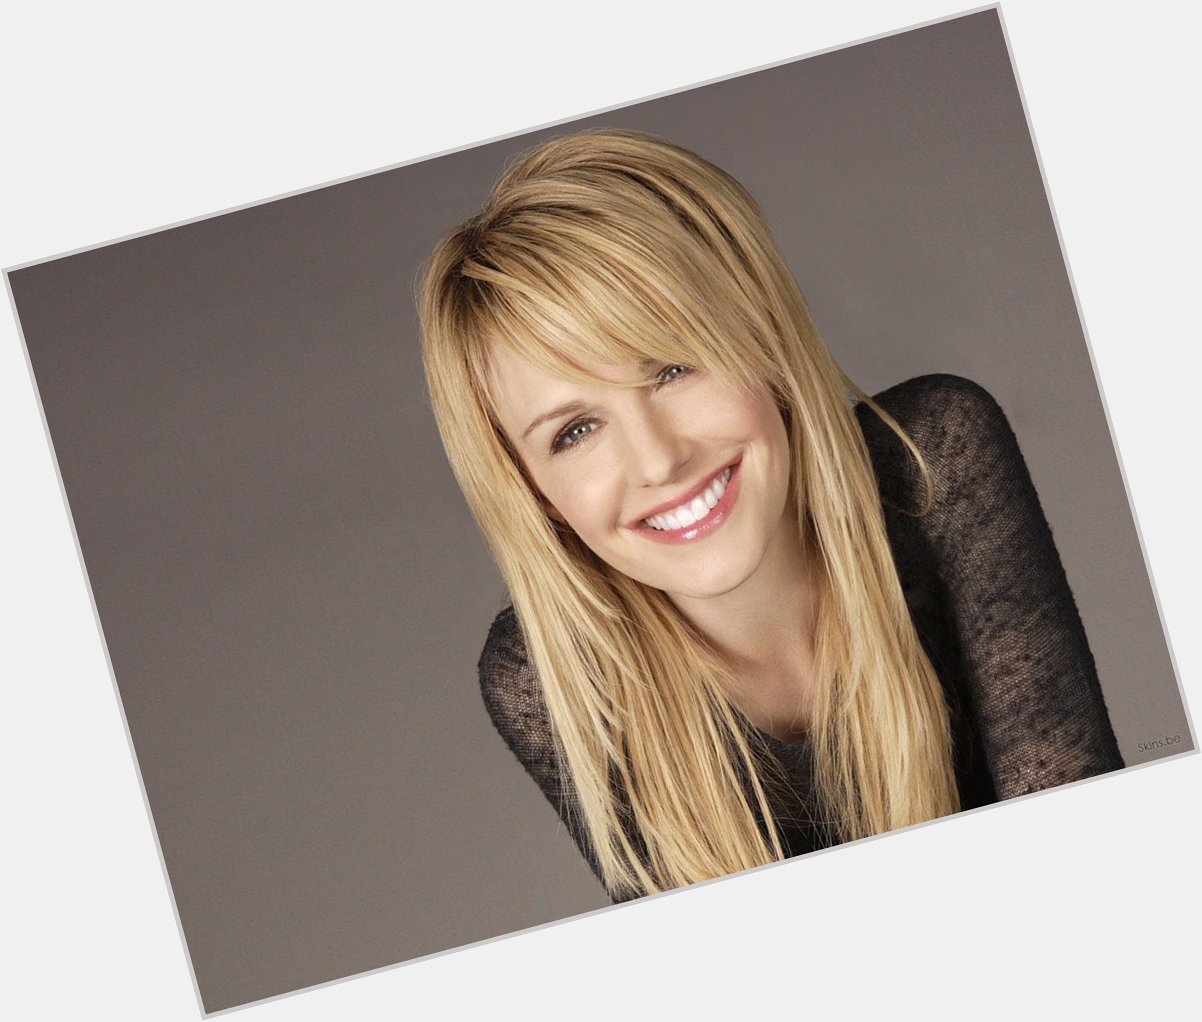    Wishing a very happy birthday to the gorgeous Kathryn Morris! 